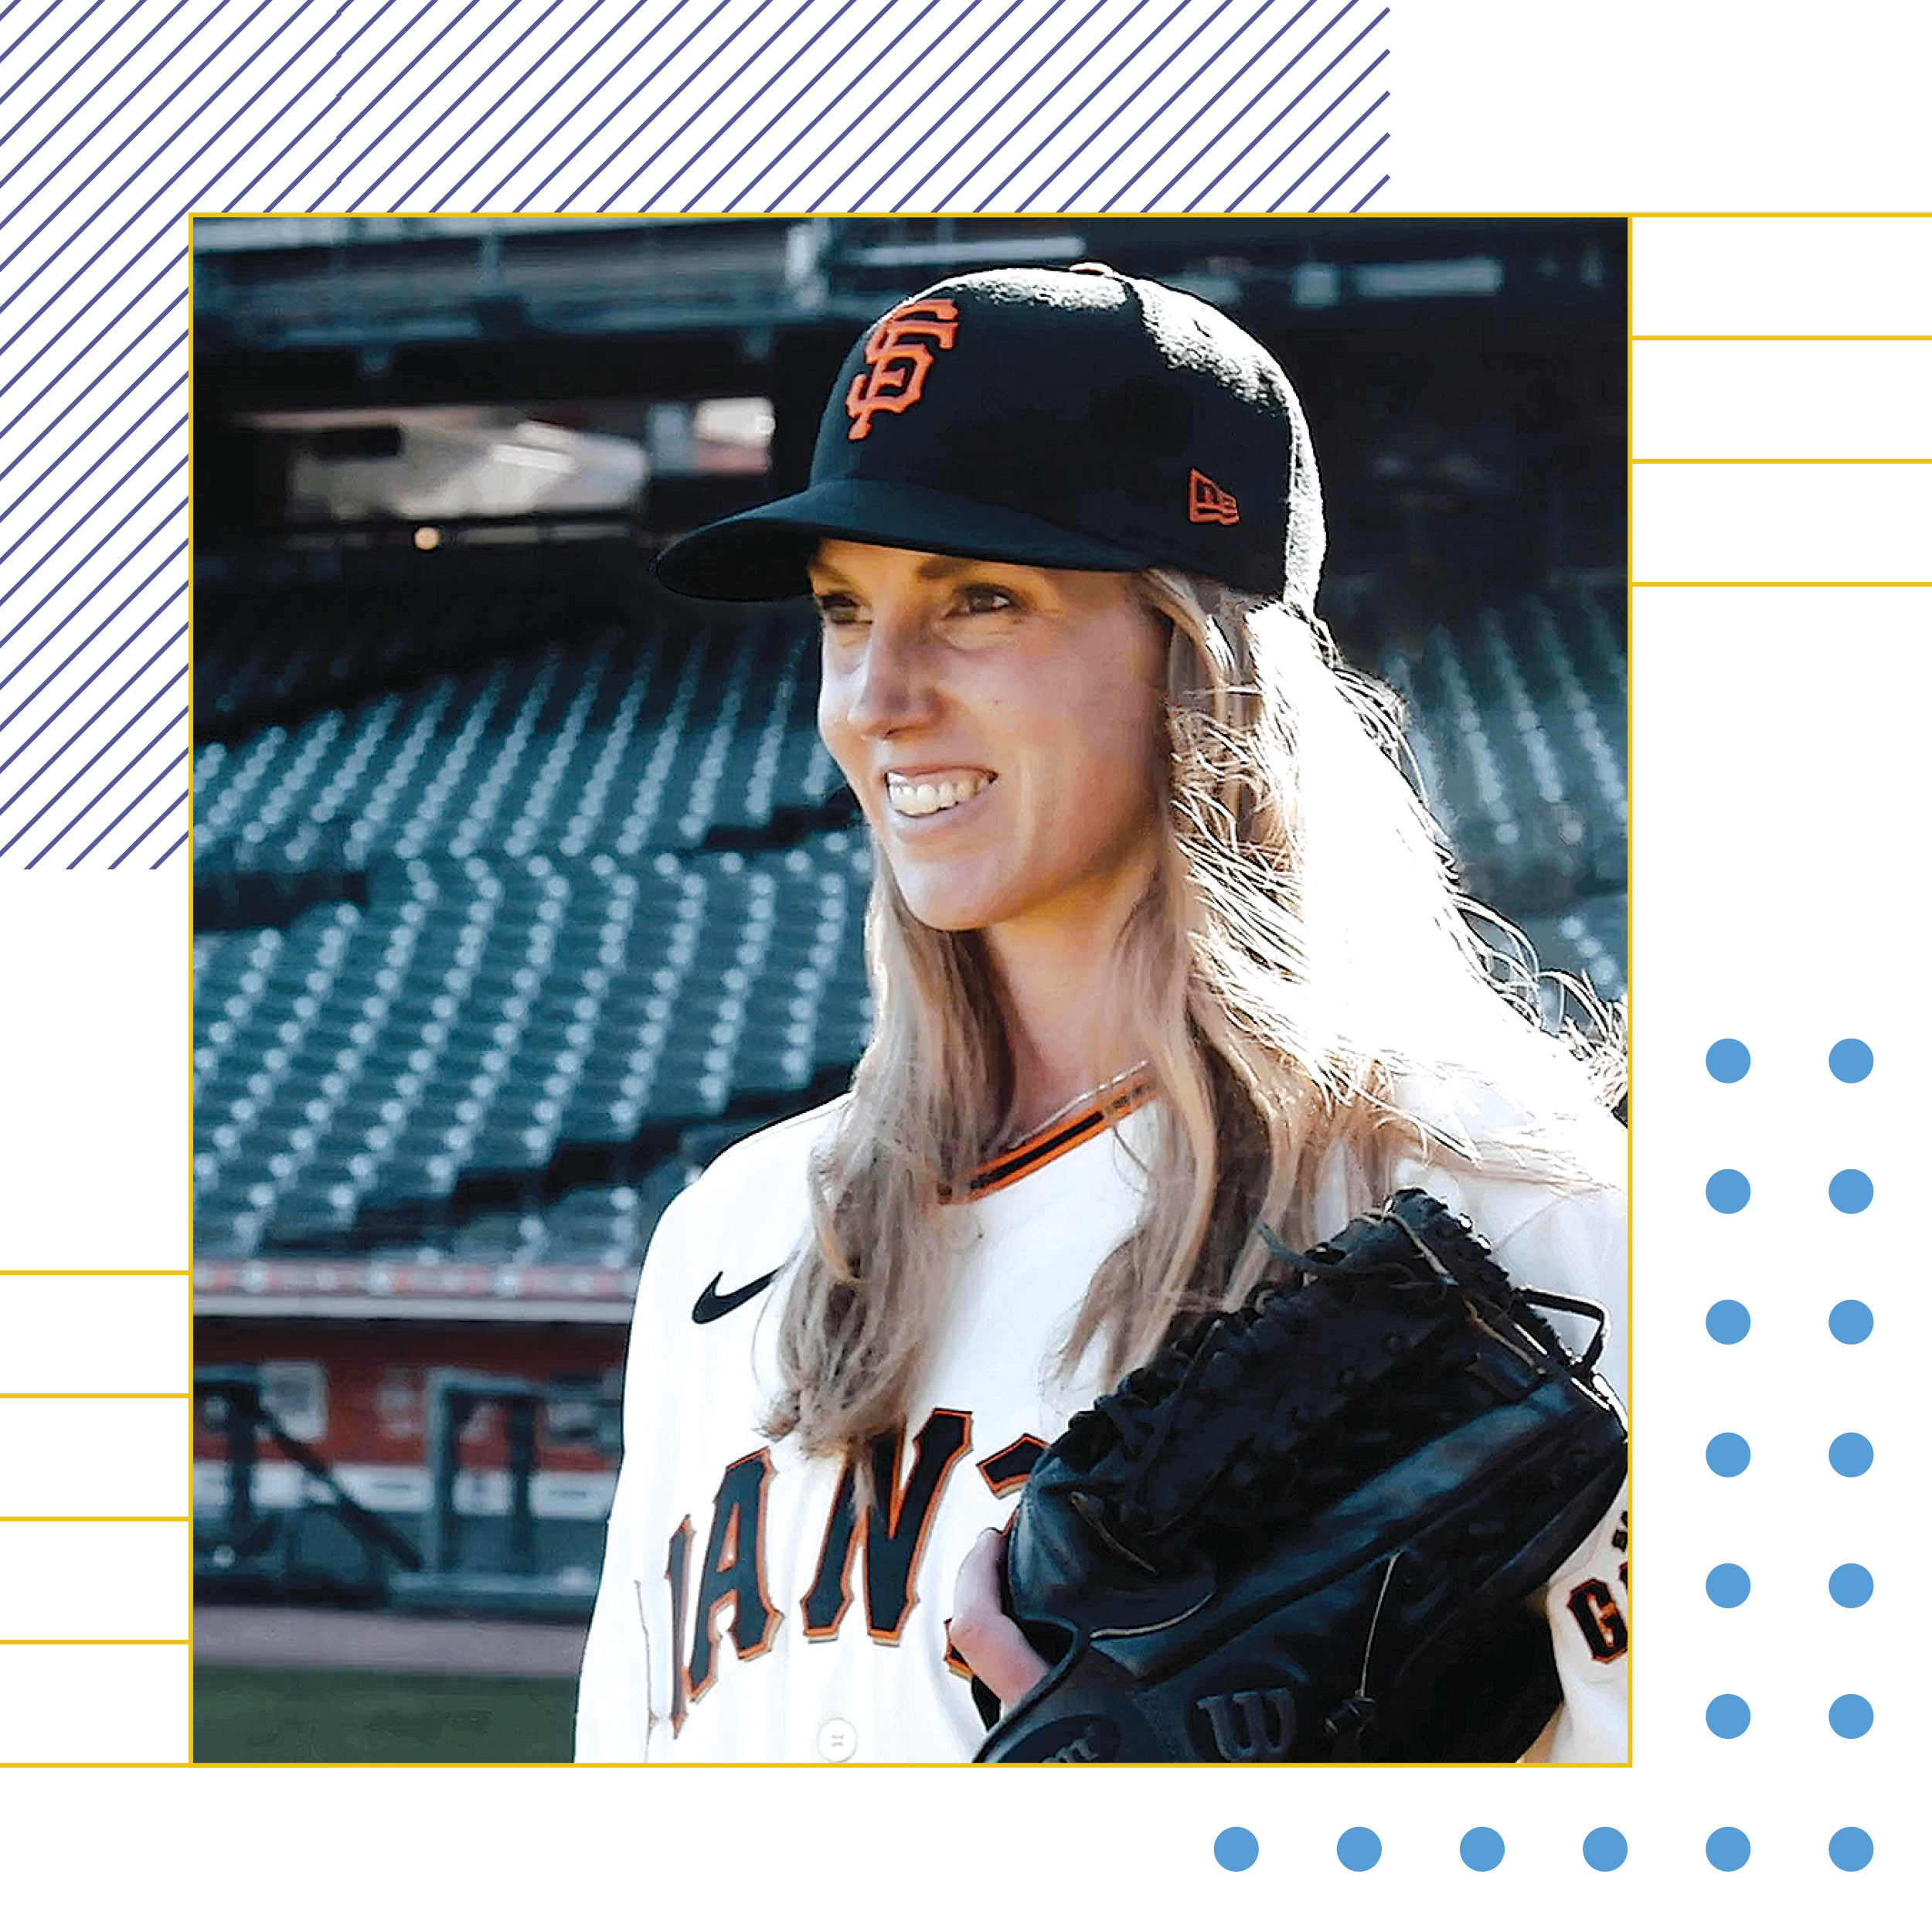 Giants assistant Alyssa Nakken becomes first woman to coach on-field in MLB  history